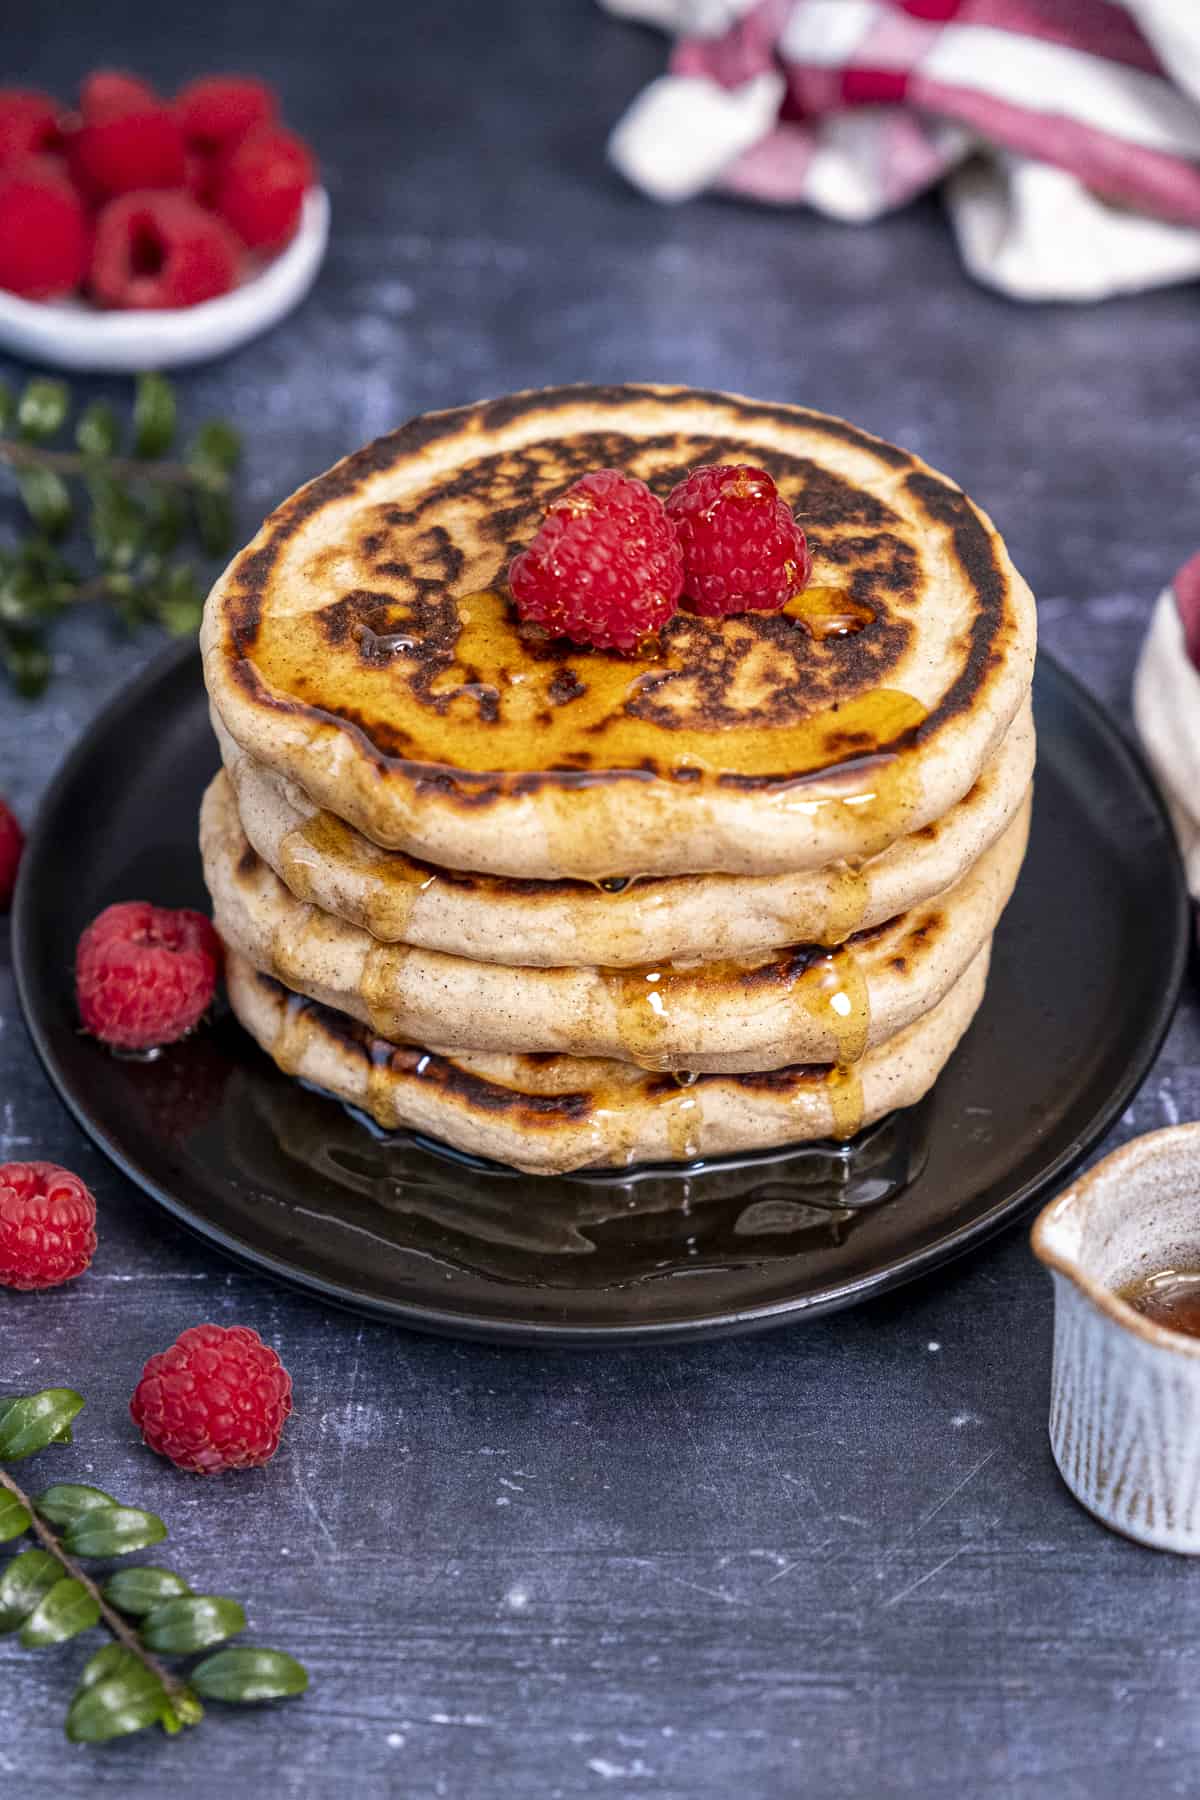 Pancakes topped with raspberries and drizzled with maple syrup on a black plate.